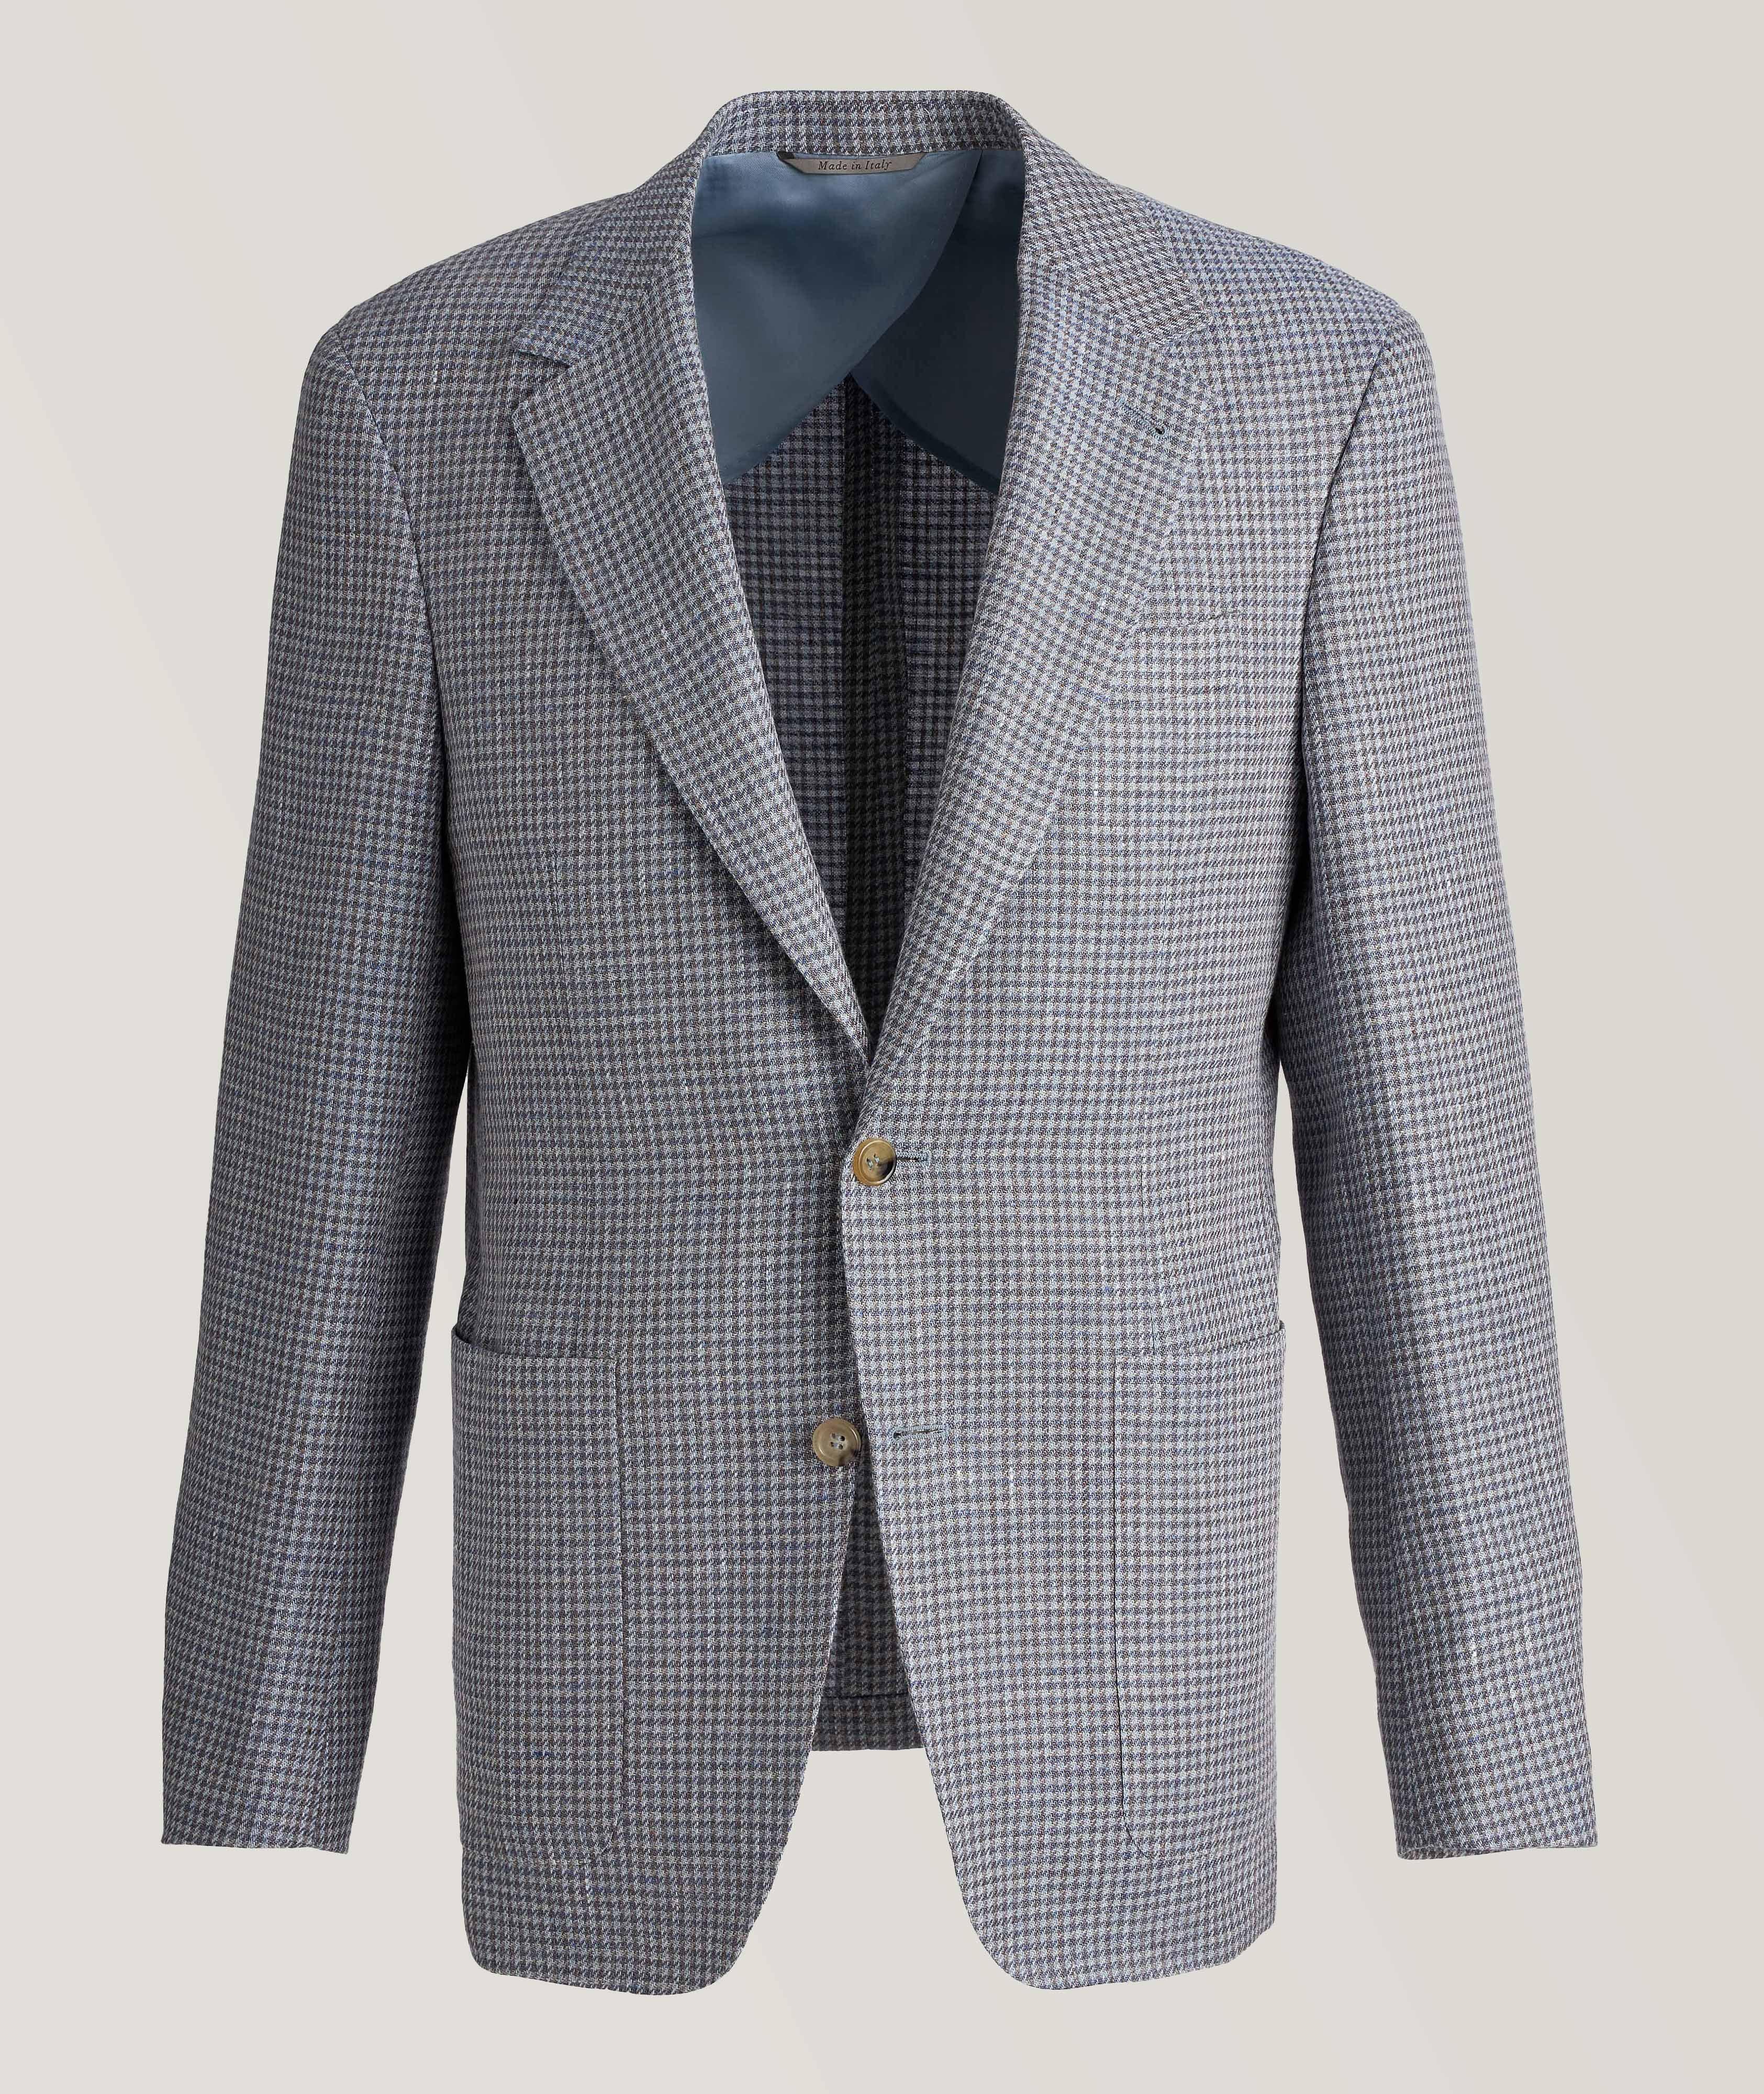 Houndstooth Wool-Linen Sports Jacket image 0